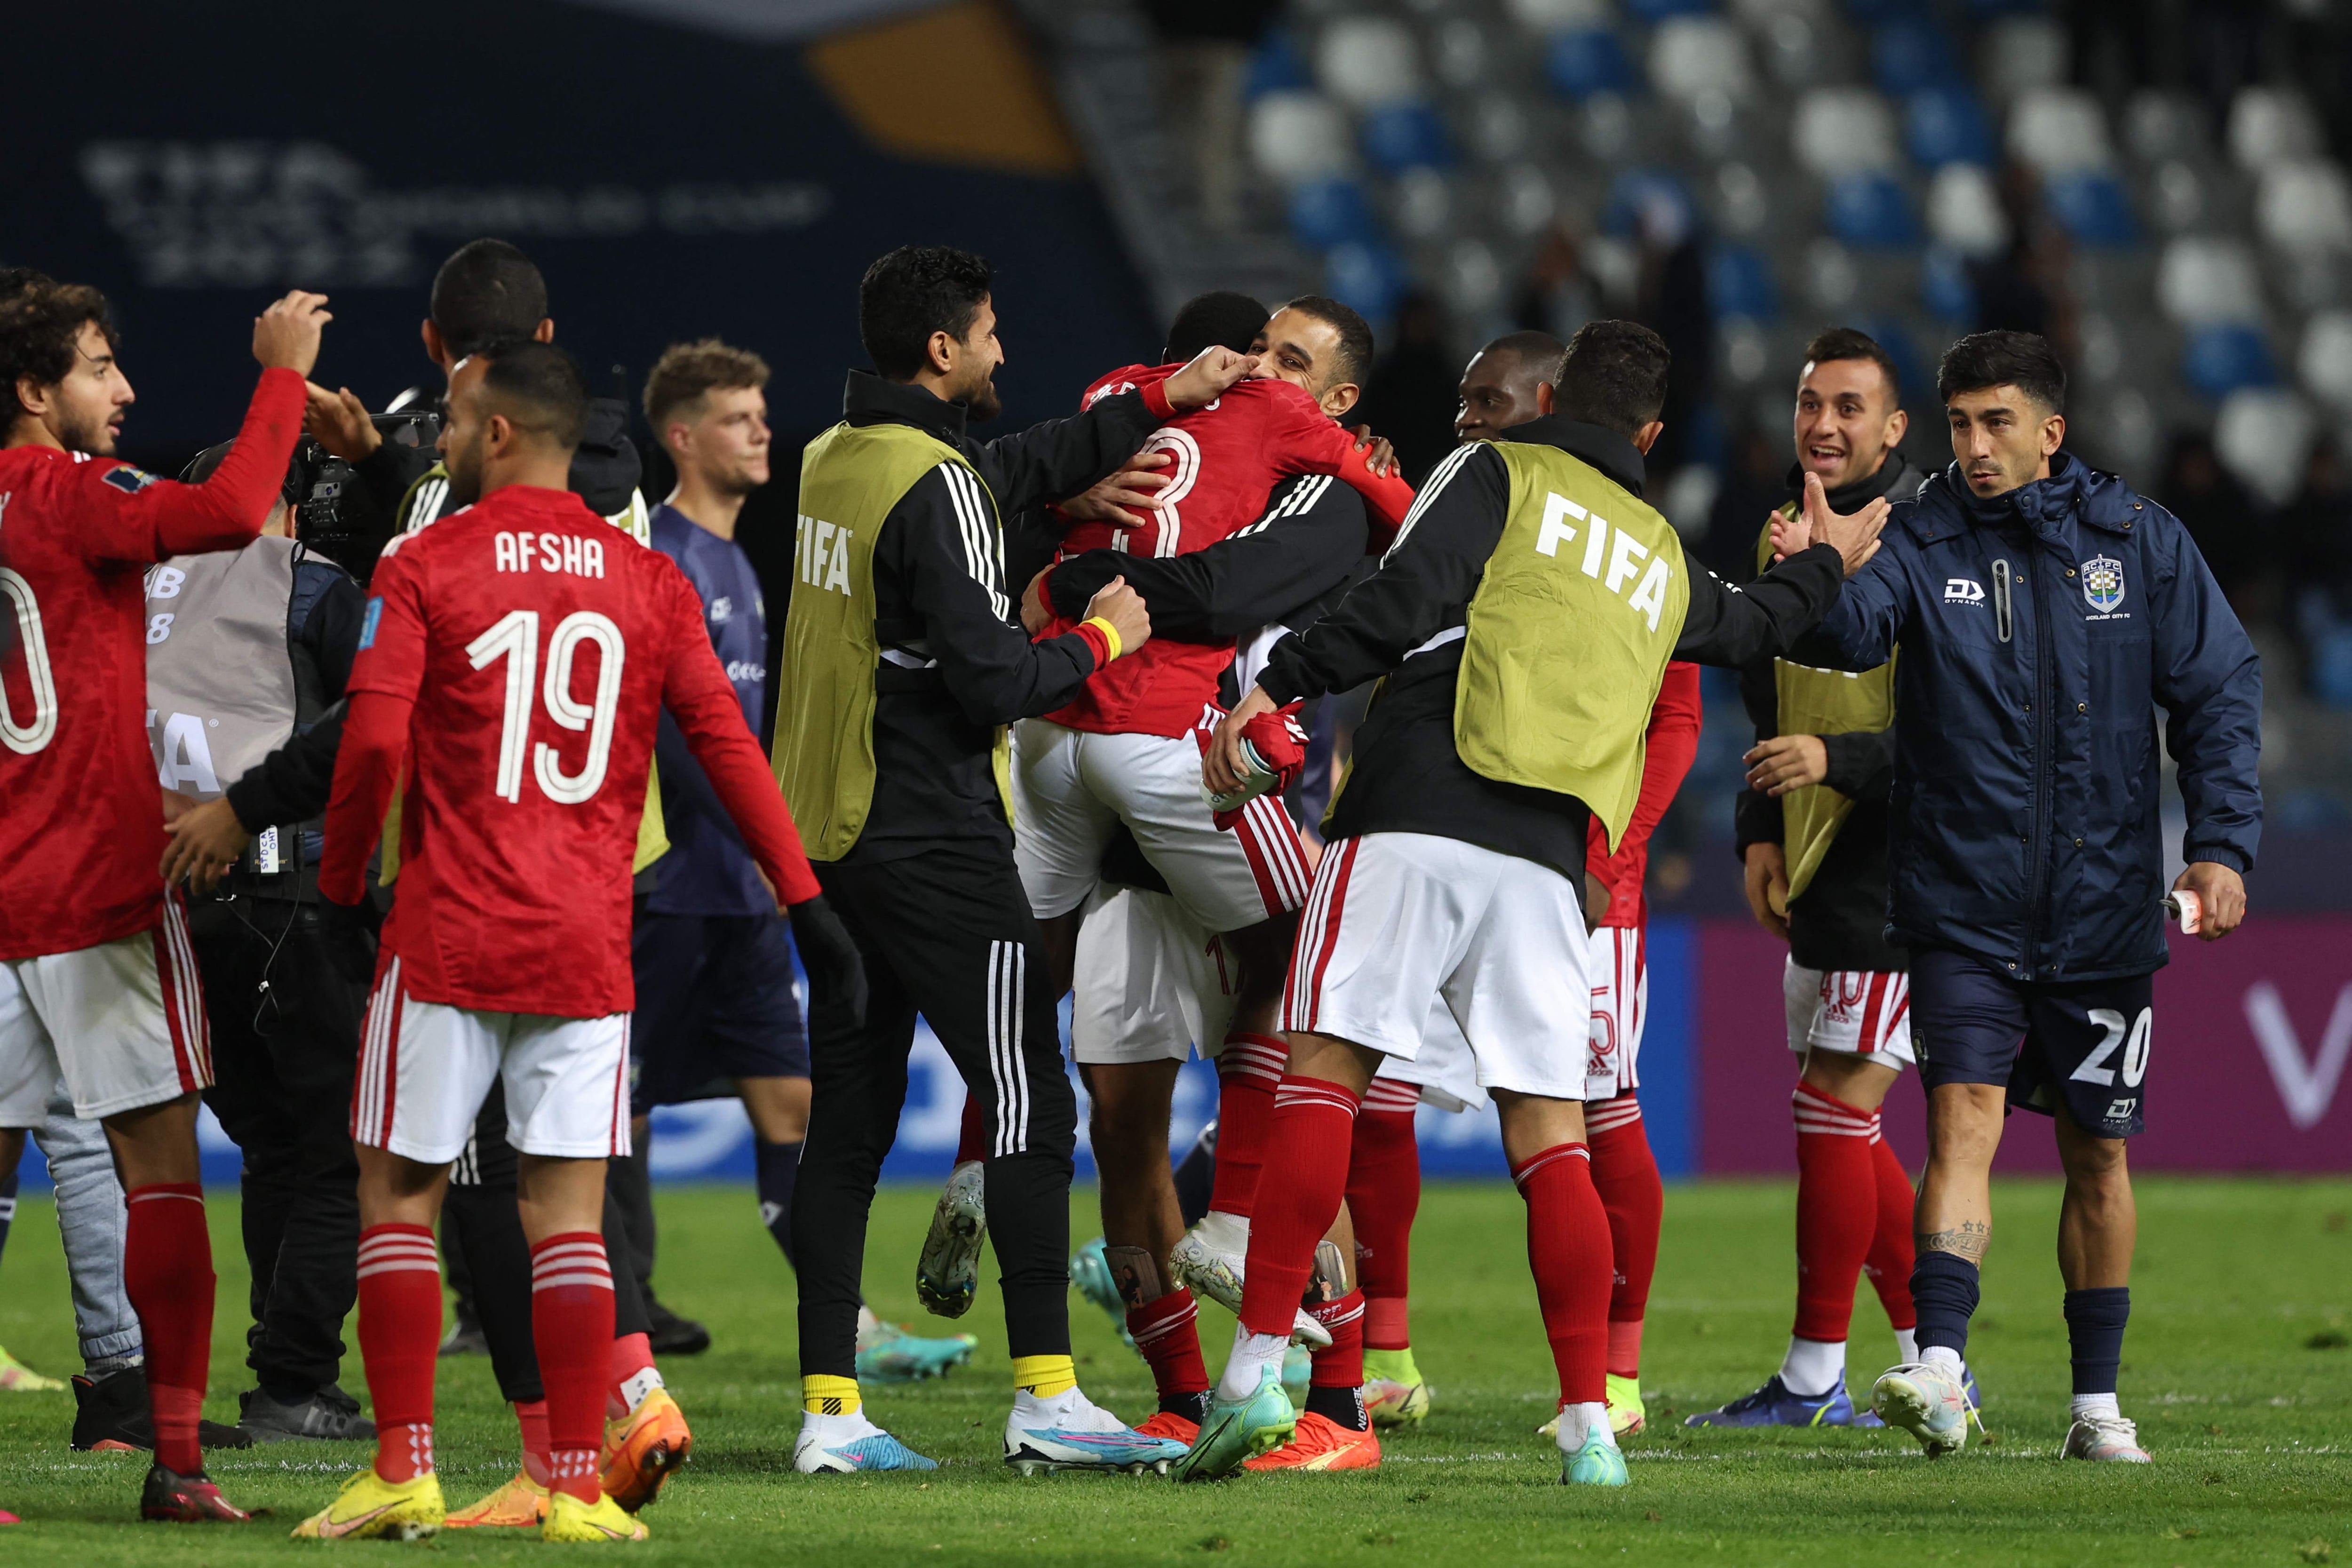 Ahly's players celebrate winning the FIFA Club World Cup first round football match between Egypt's Al-Ahly and New Zealand's Auckland City at the Ibn Batouta Stadium in Tangier on February 1, 2023. (Photo by Fadel Senna / AFP)